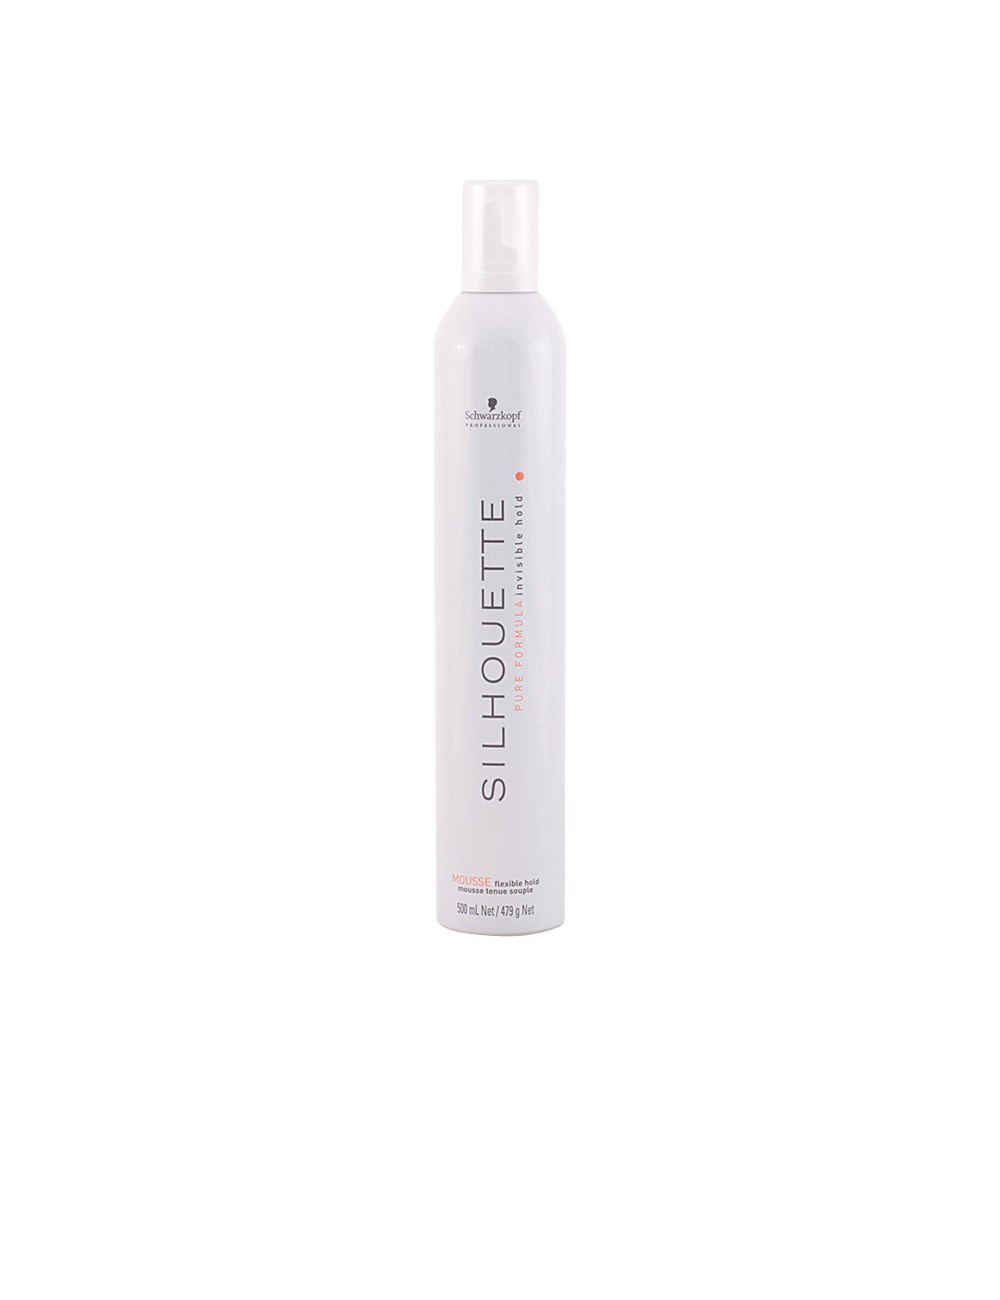 SILHOUETTE flexible hold mousse 500 ml